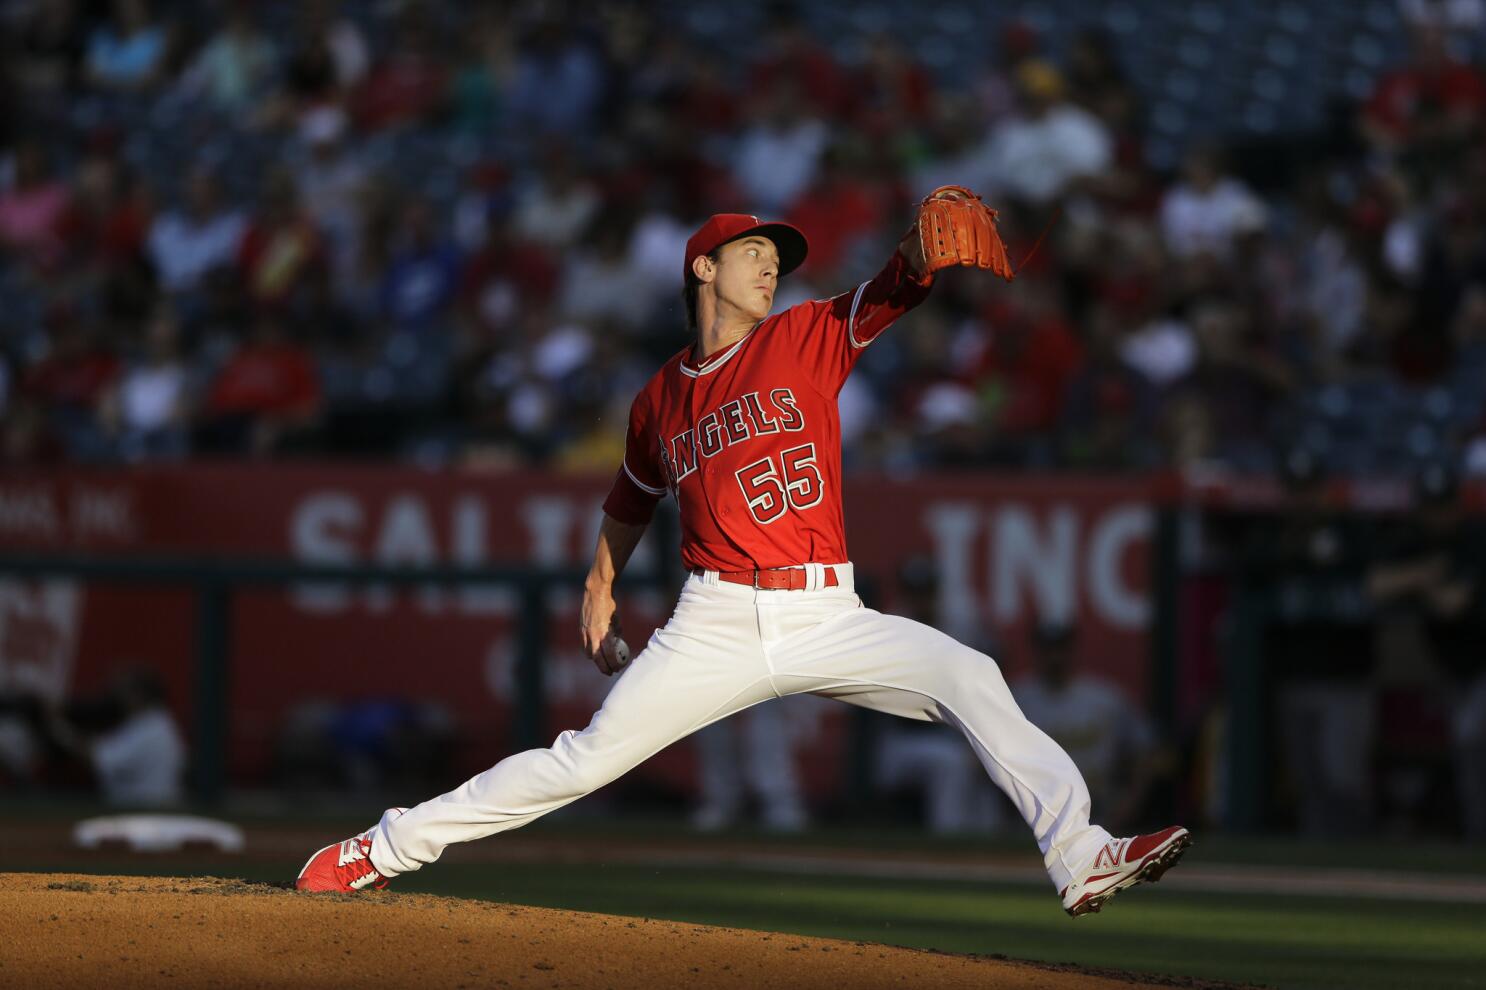 Los Angeles Angels pitcher Tim Lincecum throws to the Oakland